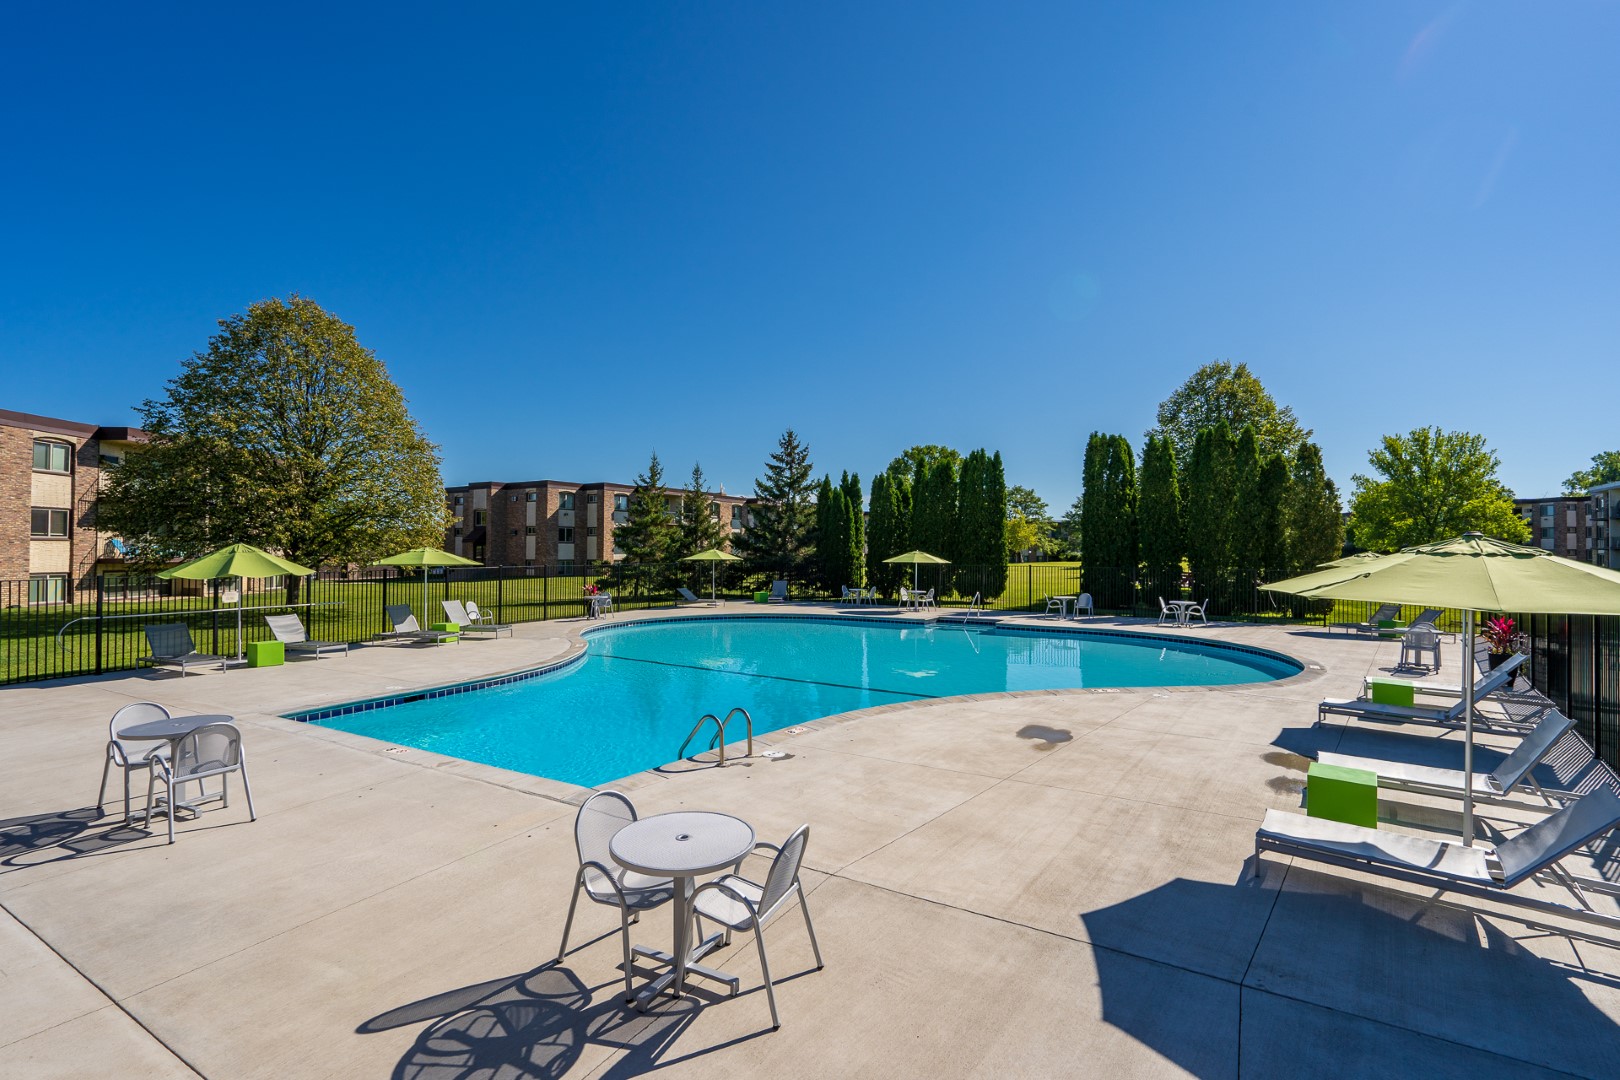 Sundeck And Pool At Sumter Green Apartments In Crystal, MN